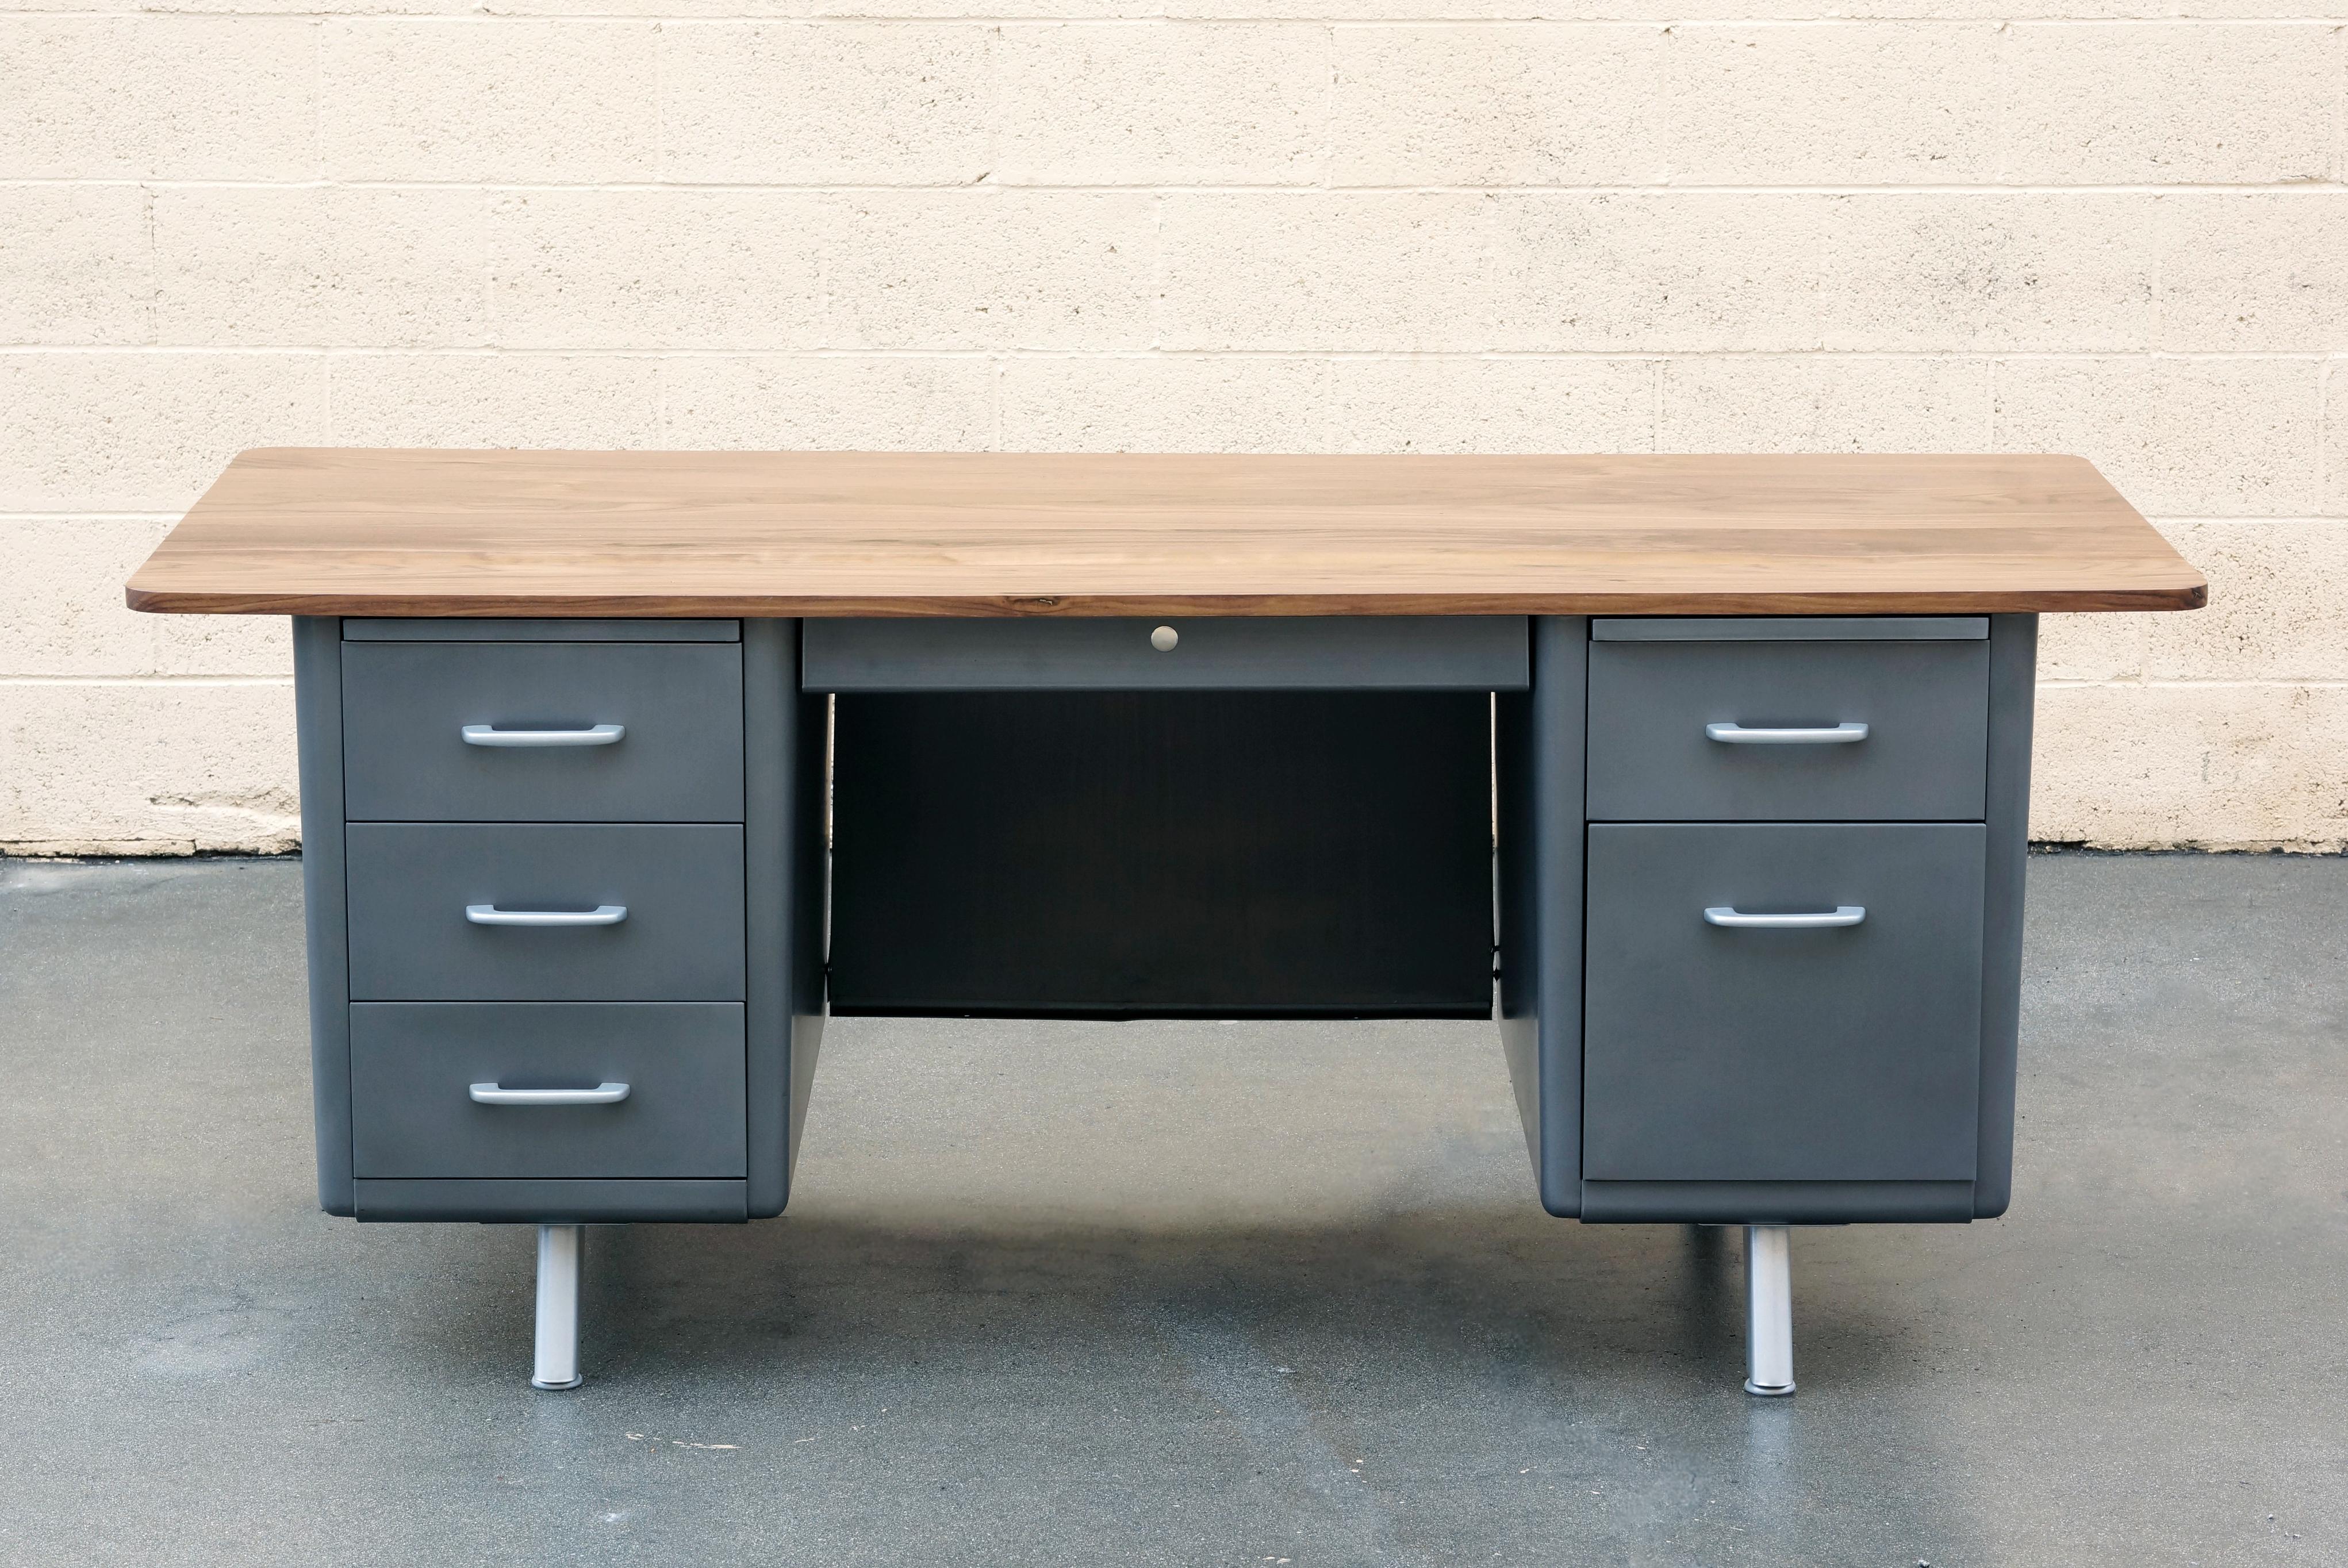 Midcentury steel tanker desk refinished with a twist. This beauty features an oversized solid walnut top with radius corners and a 